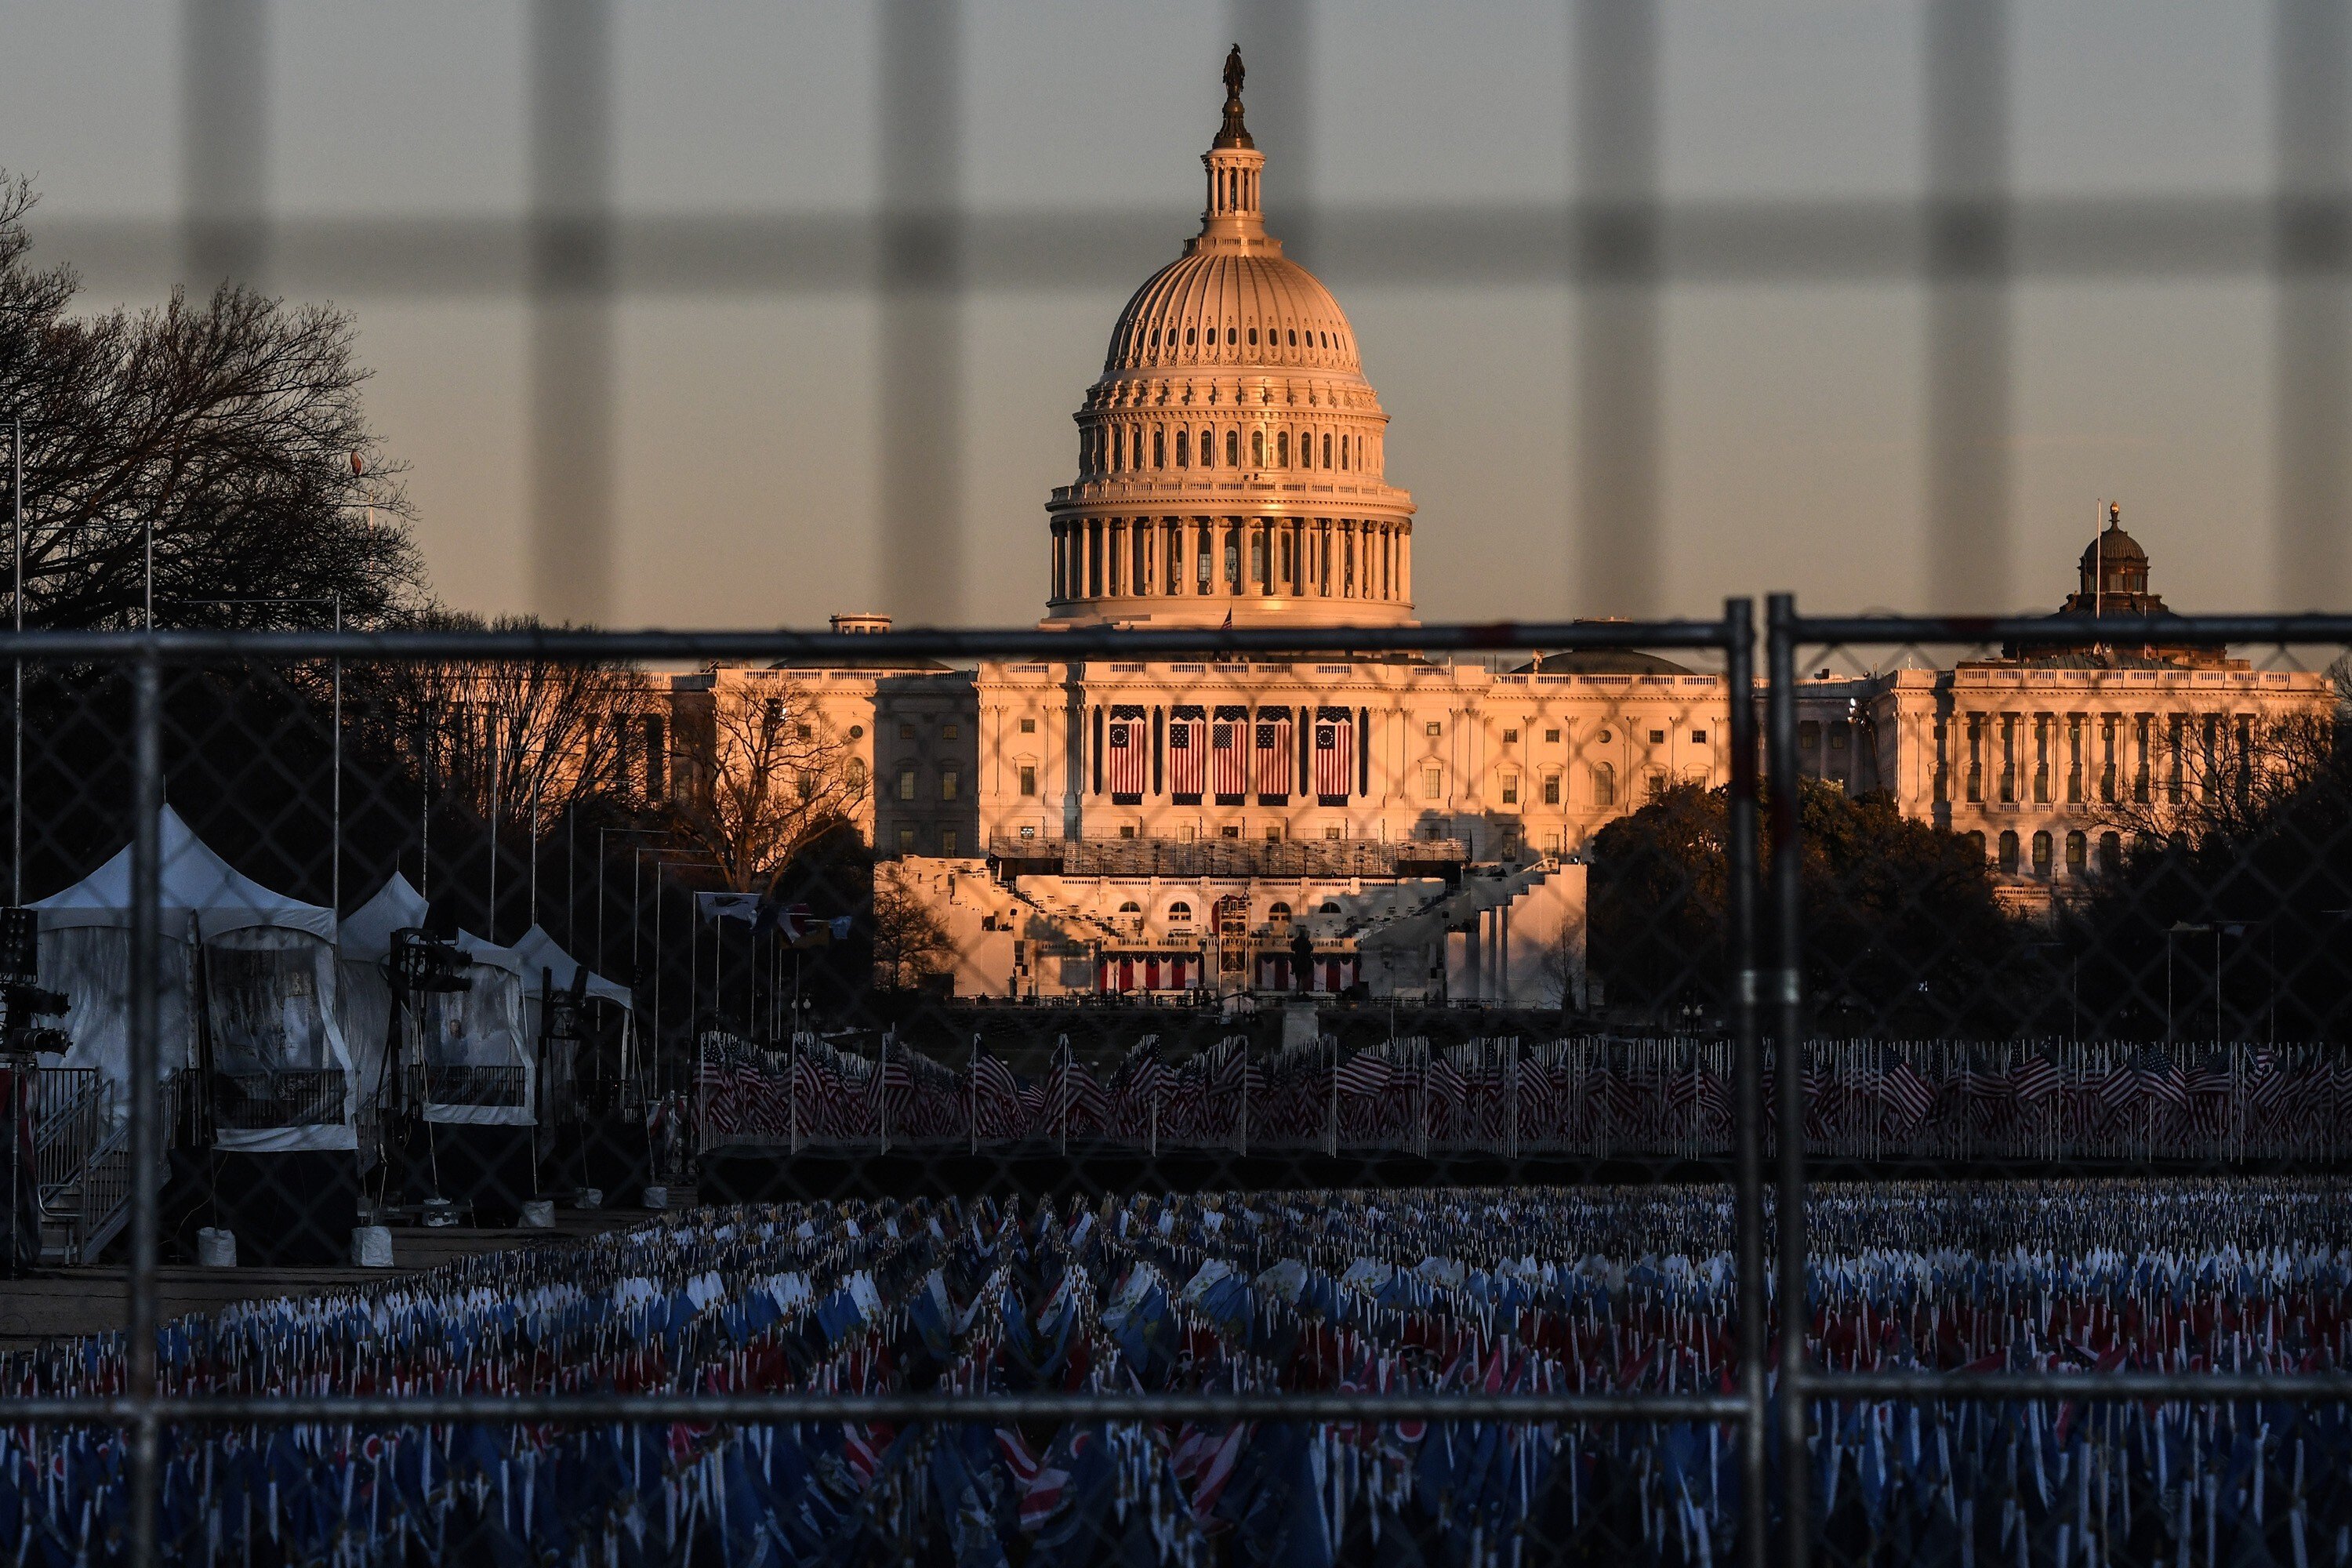 The US Capitol building is seen at sunset on the National Mall on January 19, with tight security measures in place for Joe Biden’s inauguration Photo: Getty Images / TNS